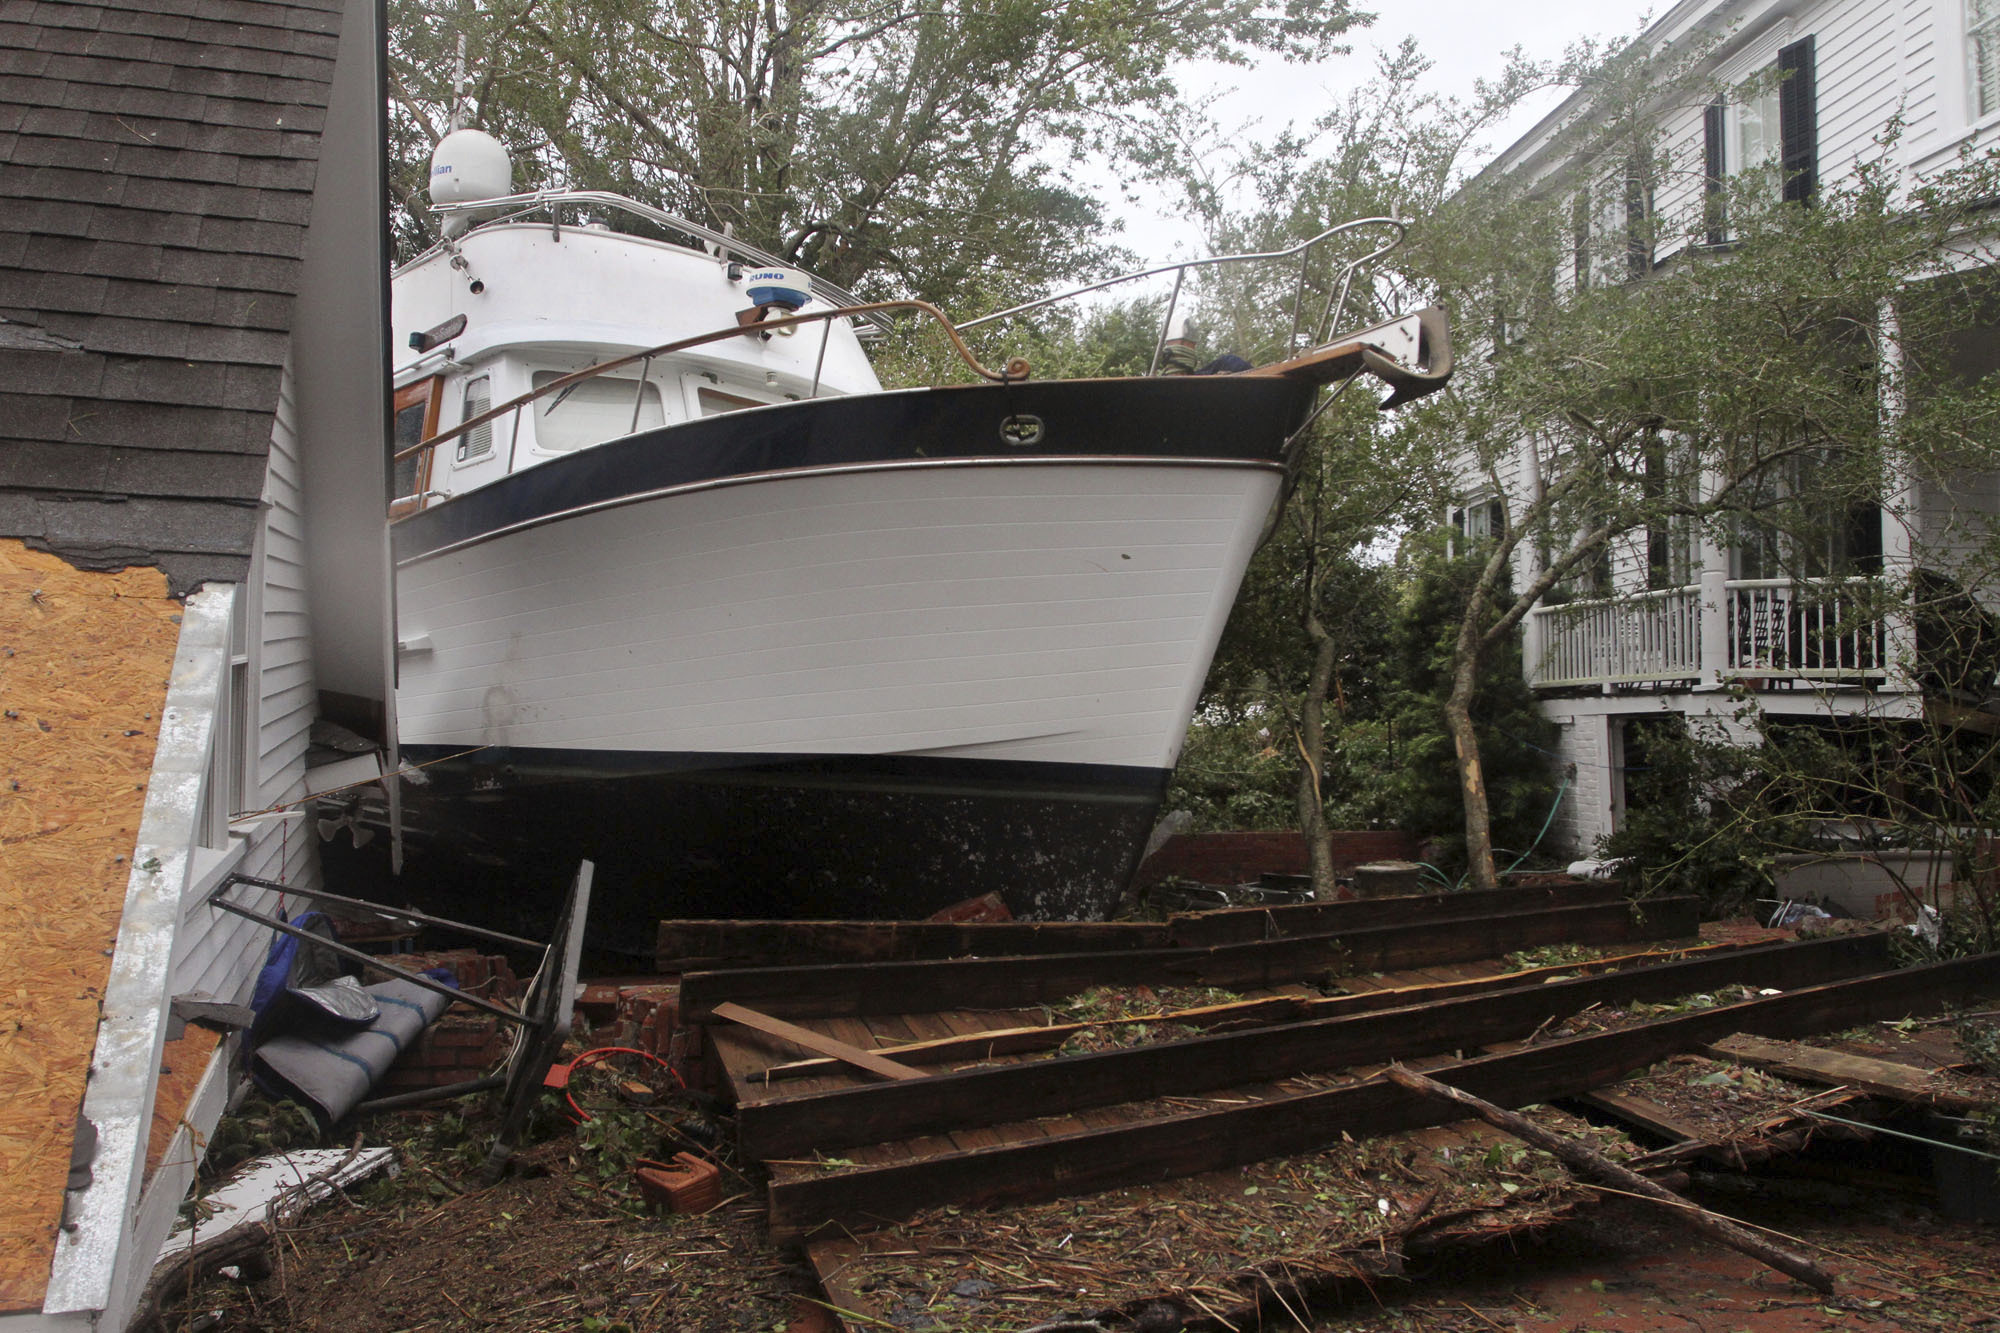 PHOTO: A 40-foot yacht lies in the yard of a storm-damaged home on East Front Street in New Bern, N.C., Saturday, Sept. 15, 2018. The boat washed up with storm surge and debris from Hurricane Florence.